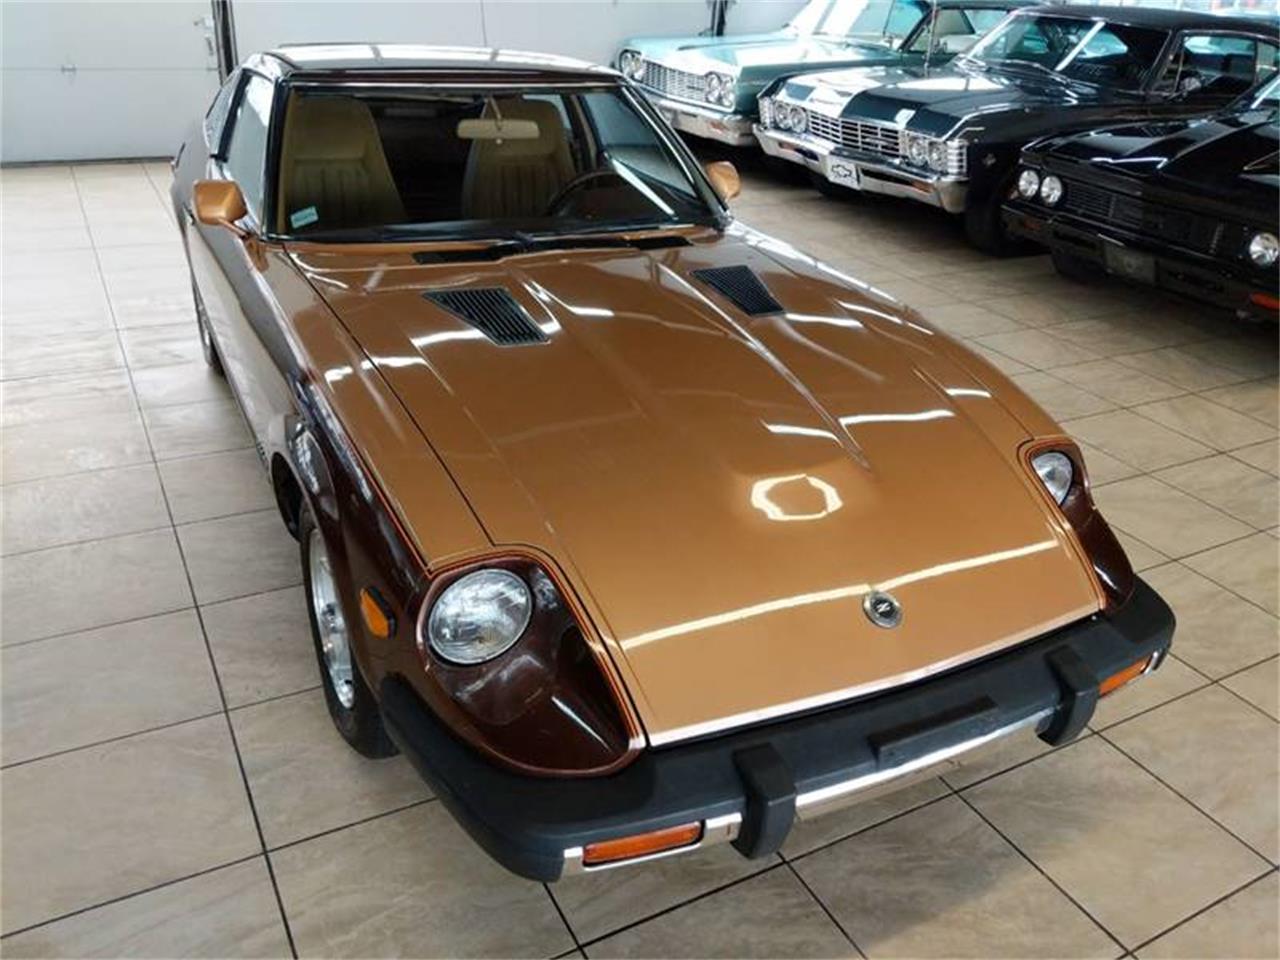 1979 Datsun 280ZX for sale in St. Charles, IL – photo 83